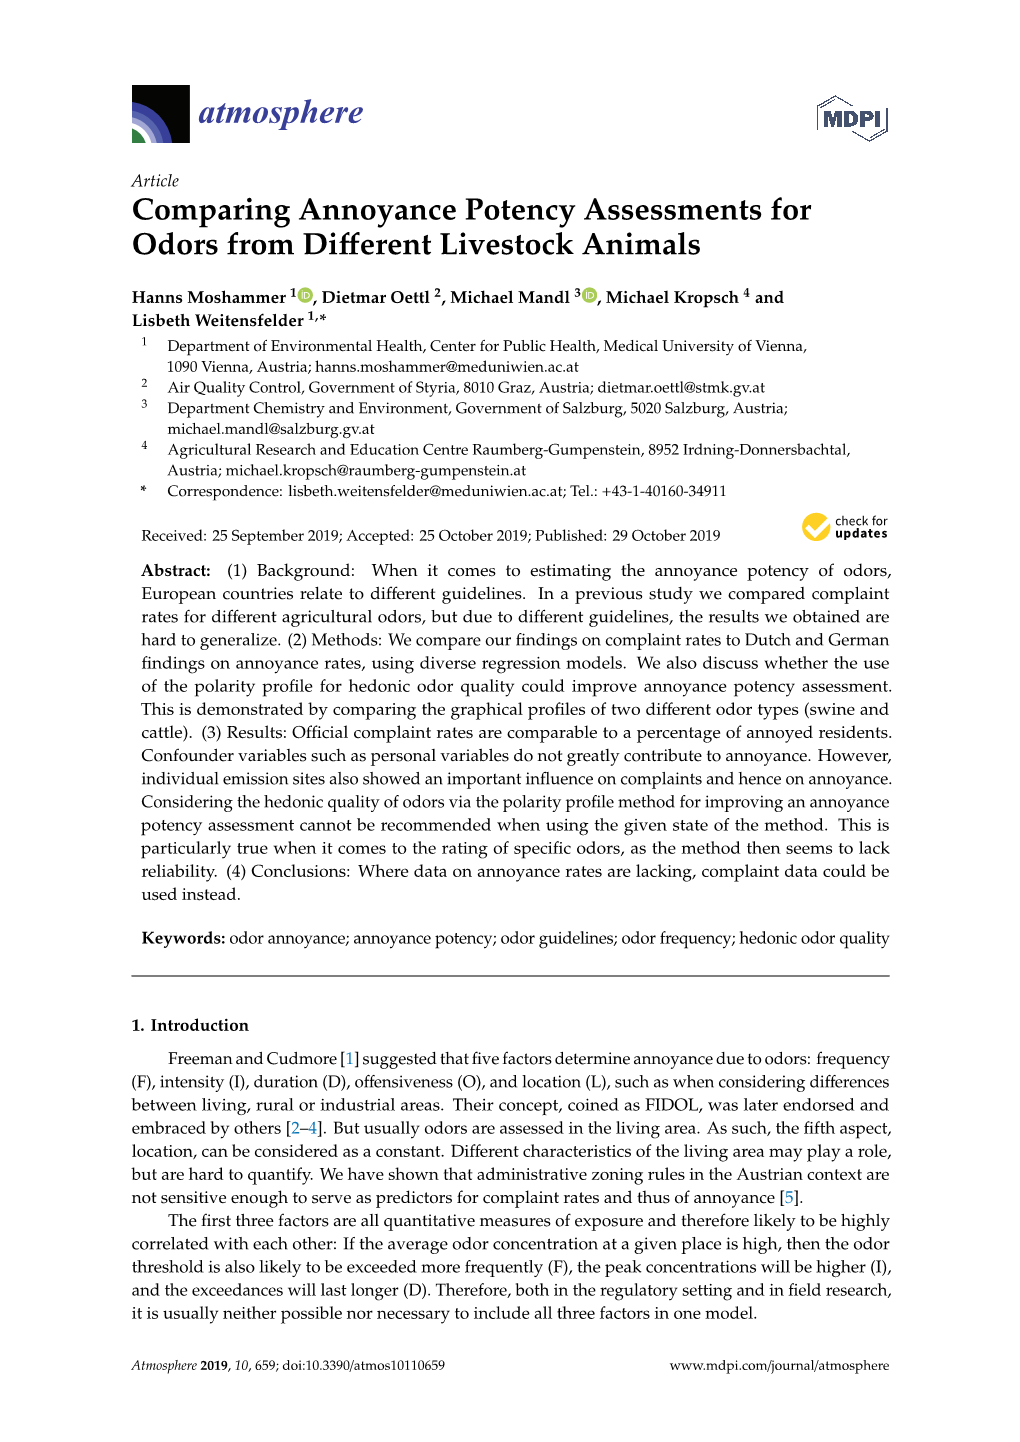 Comparing Annoyance Potency Assessments for Odors from Different Livestock Animals